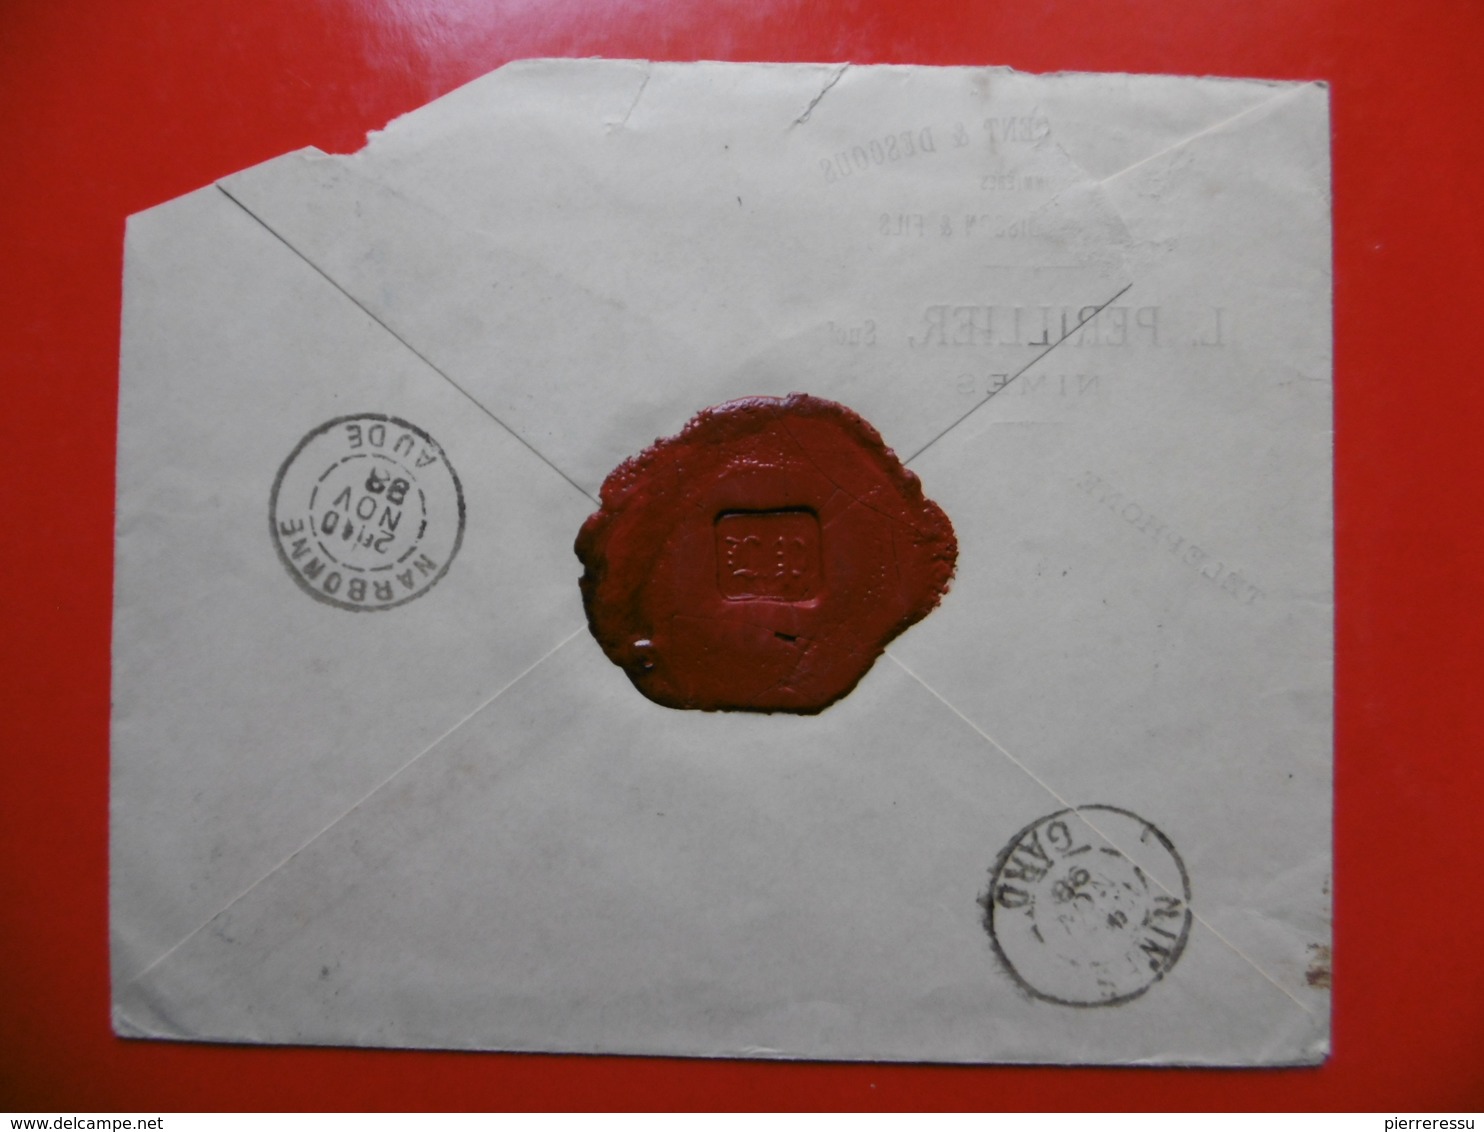 LETTRE RECOMMANDE 4 TIMBRES TYPES SAGE CACHET NIMES A CACHET OCTOGONAL 1898 - 1877-1920: Semi Modern Period